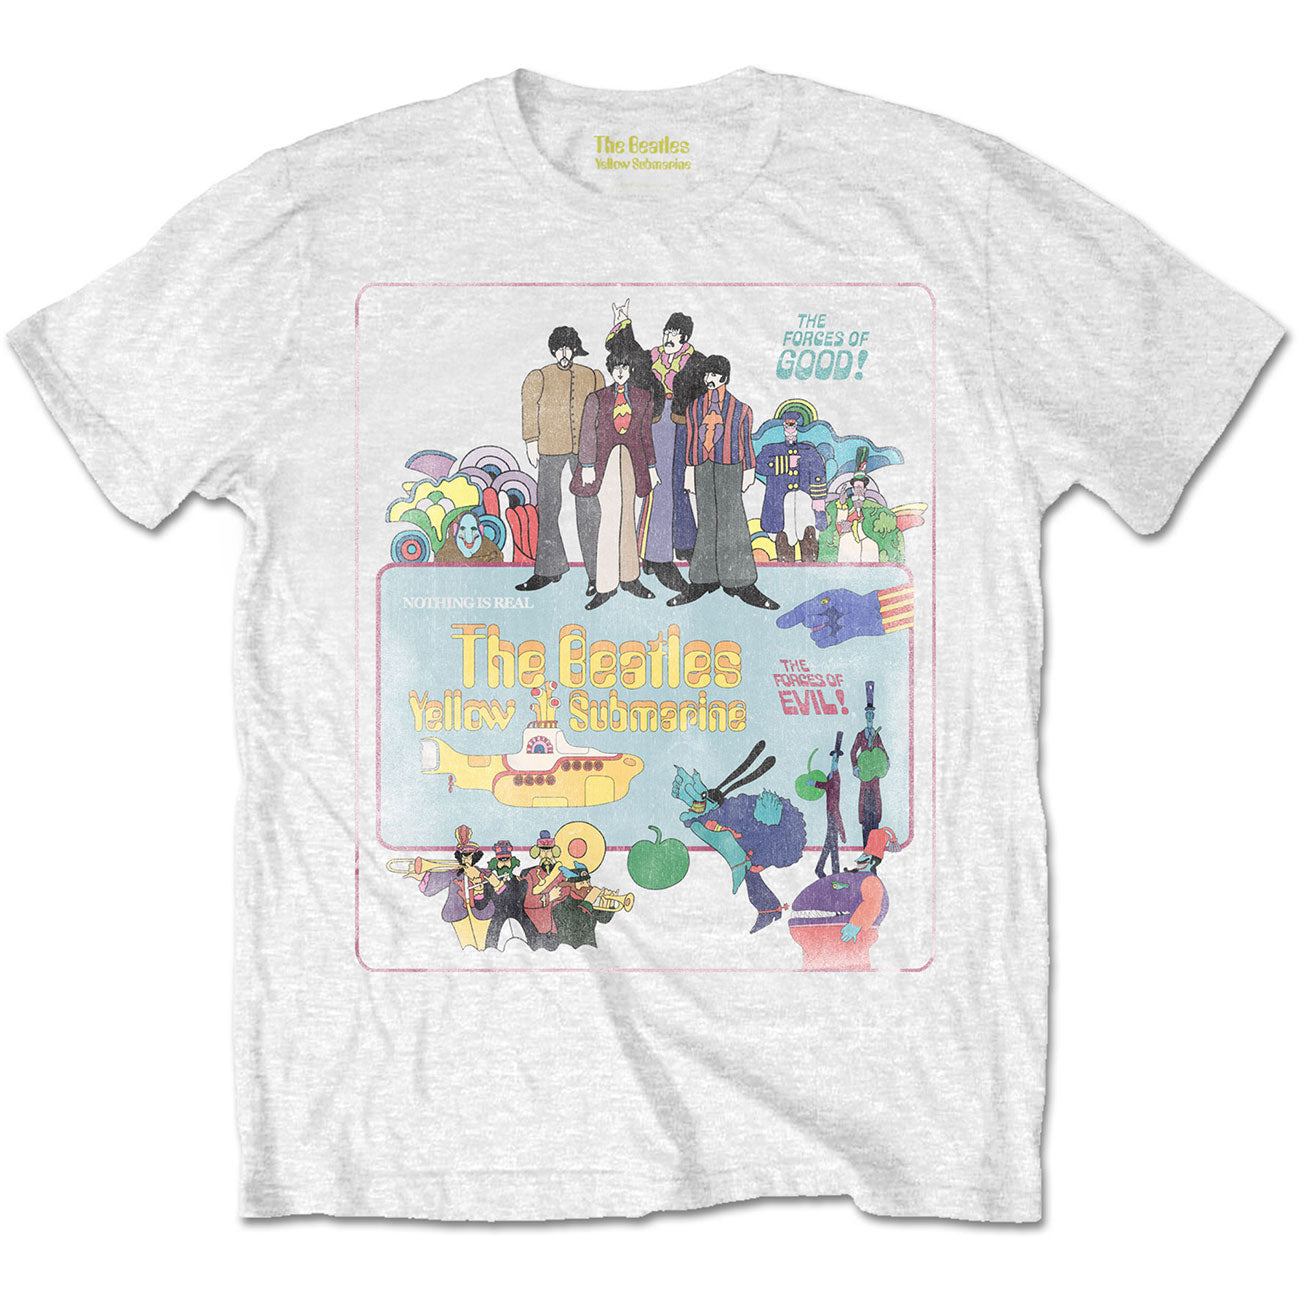 The Beatles T-Shirt: Yellow Submarine Vintage Movie Poster